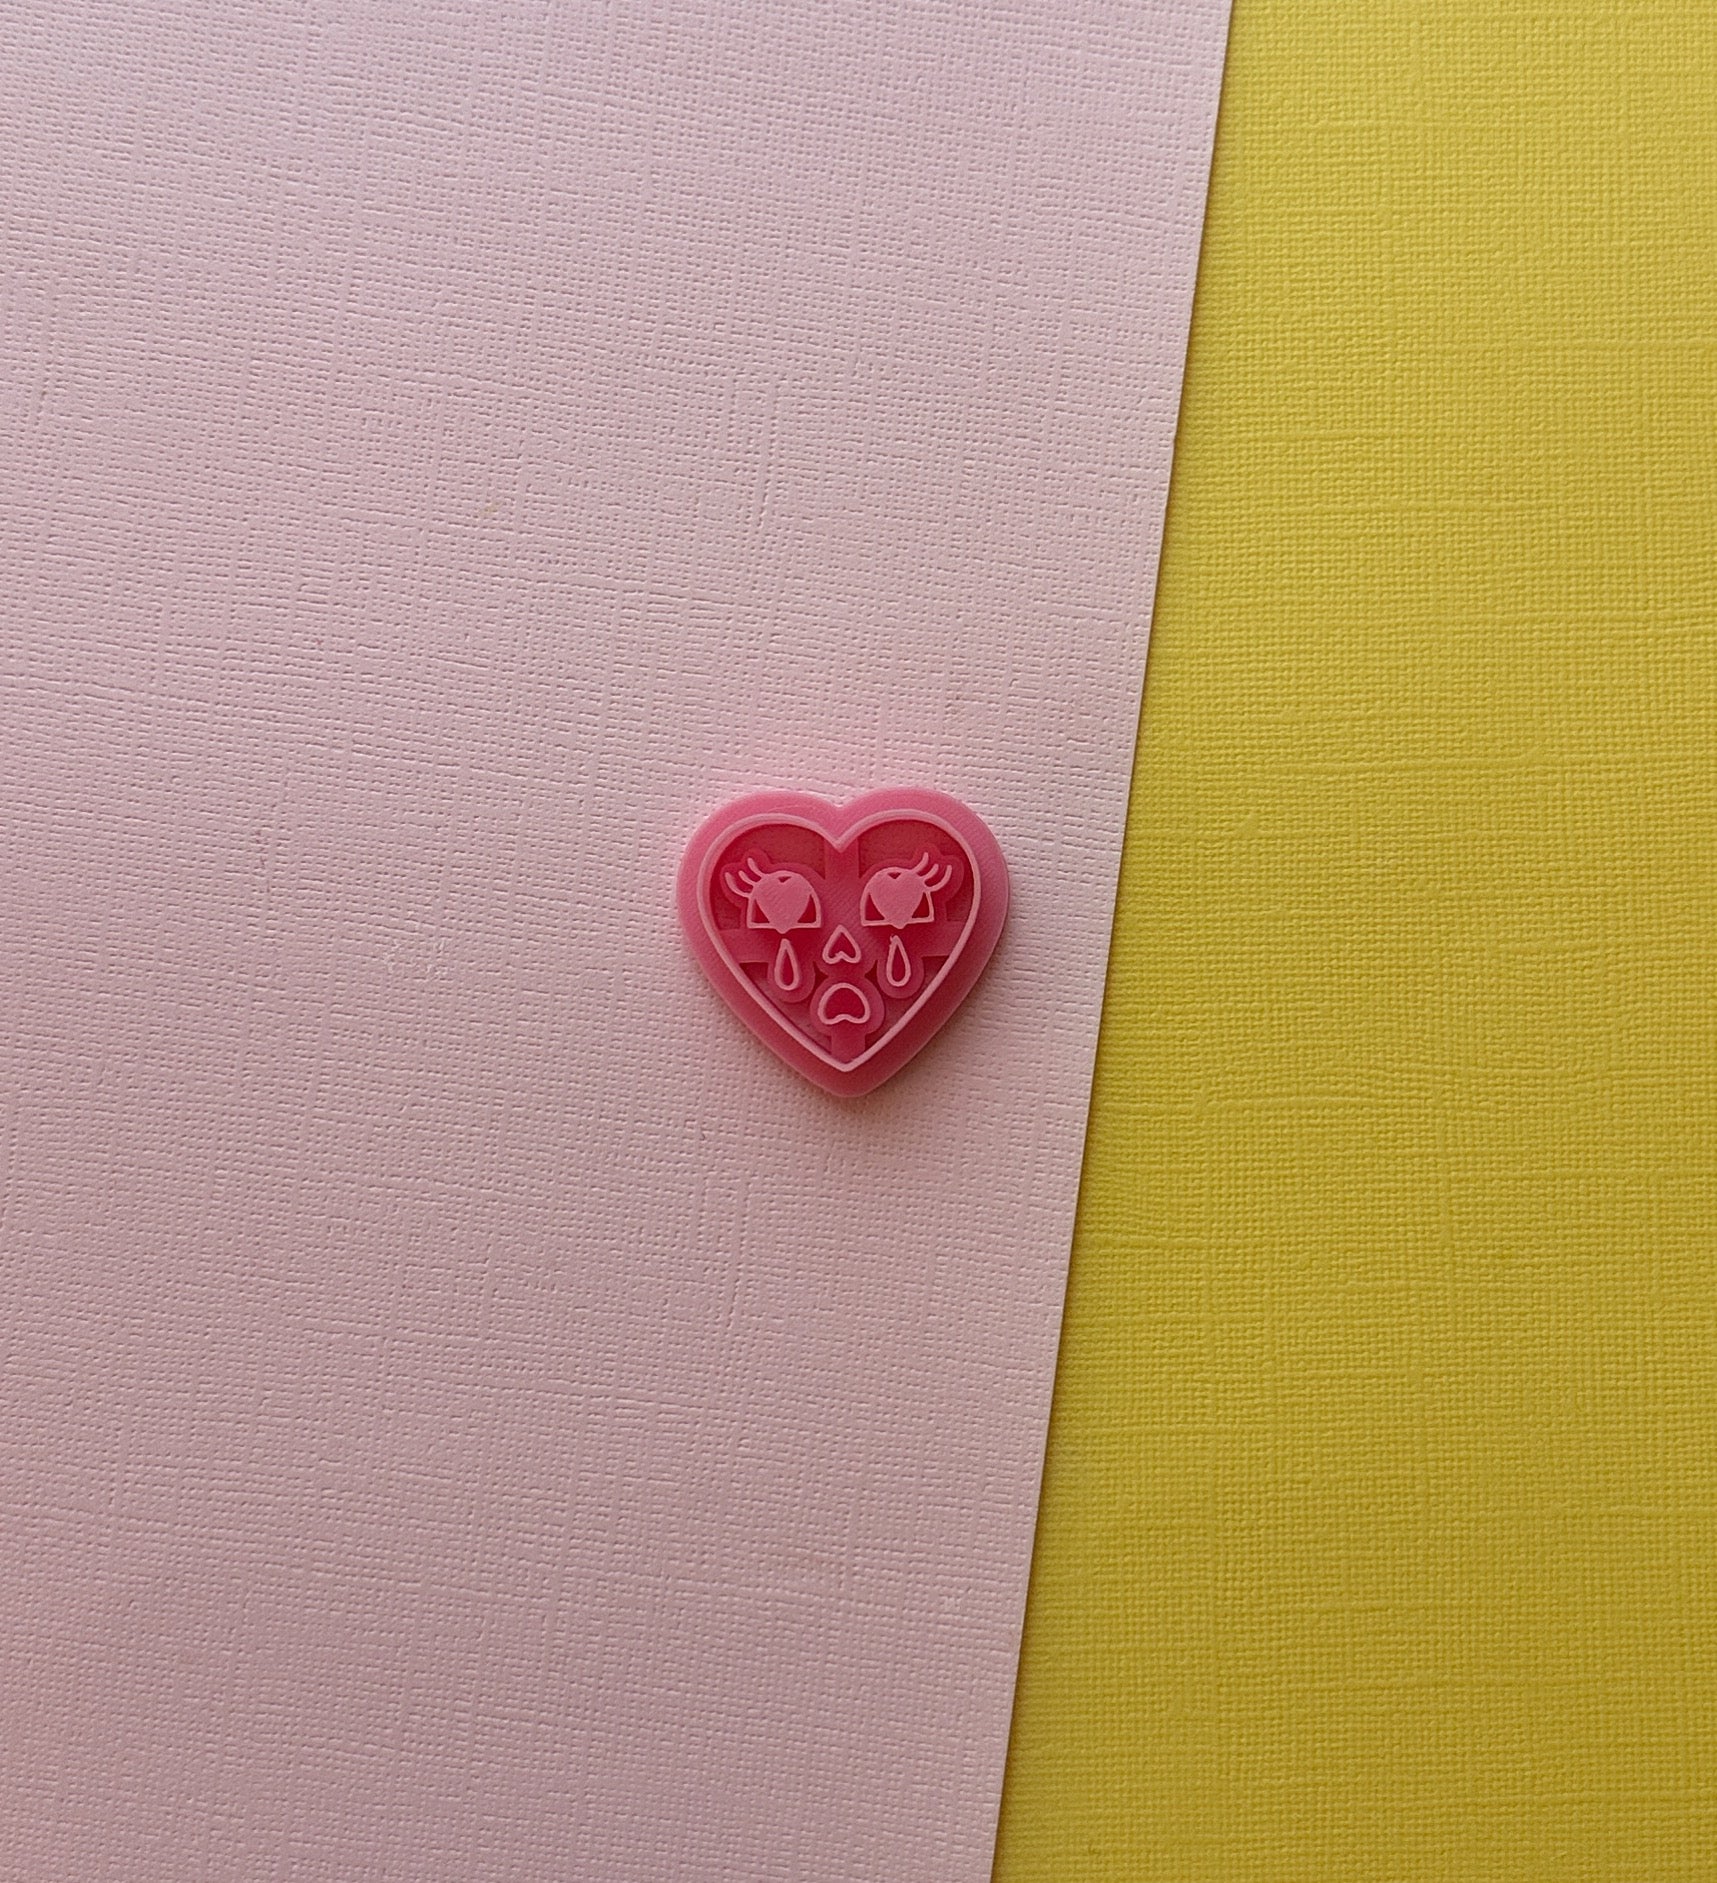 Valentine Crying Heart Clay Cutter